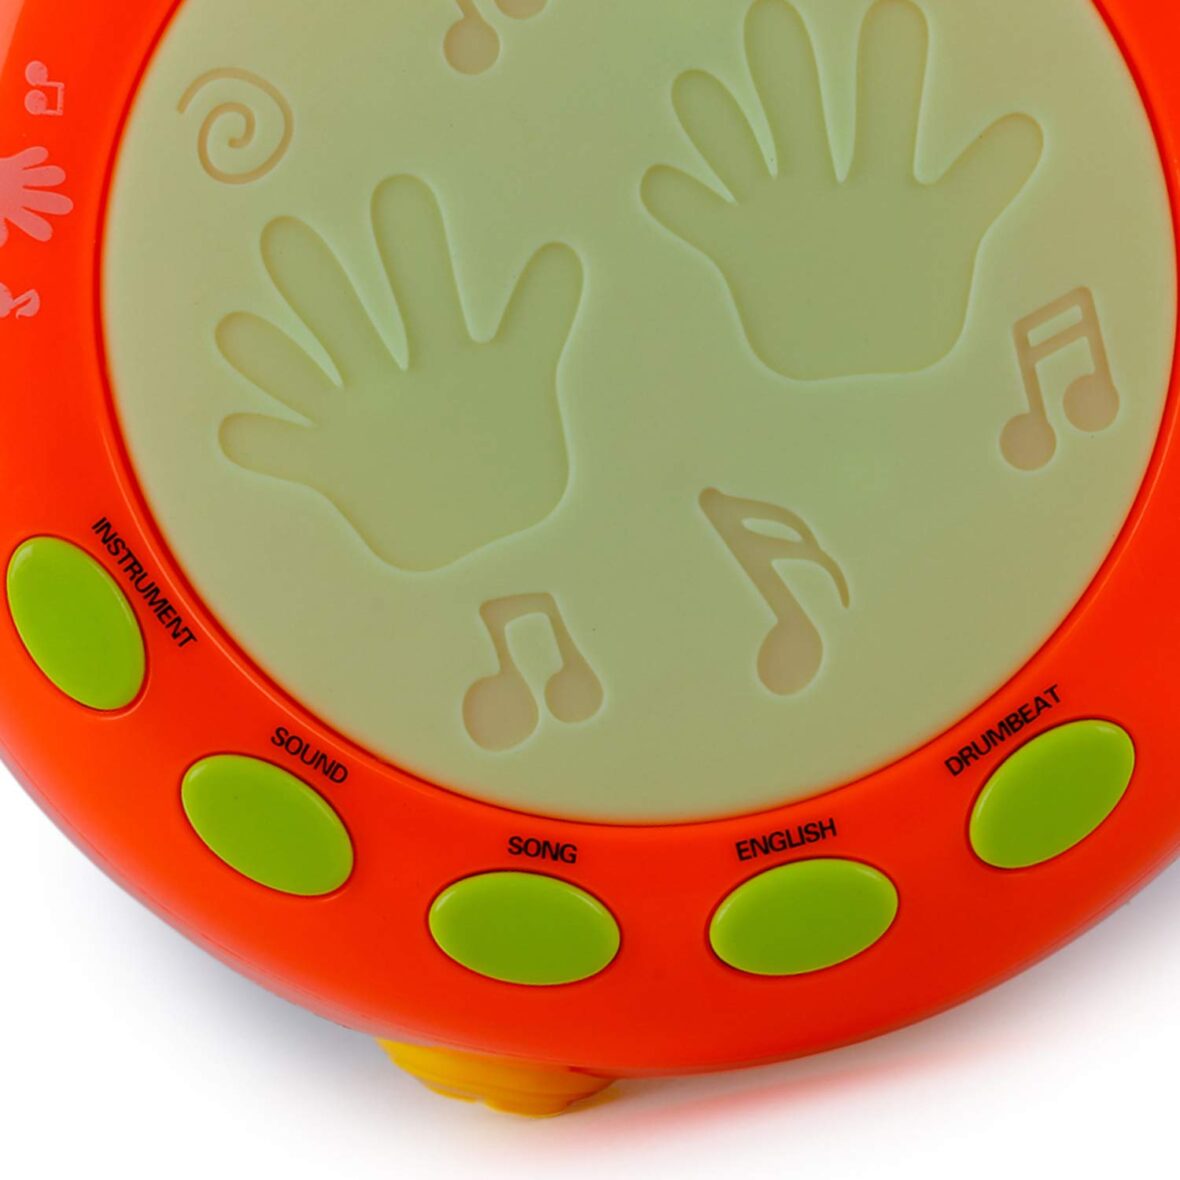 Battery Operated Flash Drum with Rotating Lamp Light & Musical Instrument Sounds